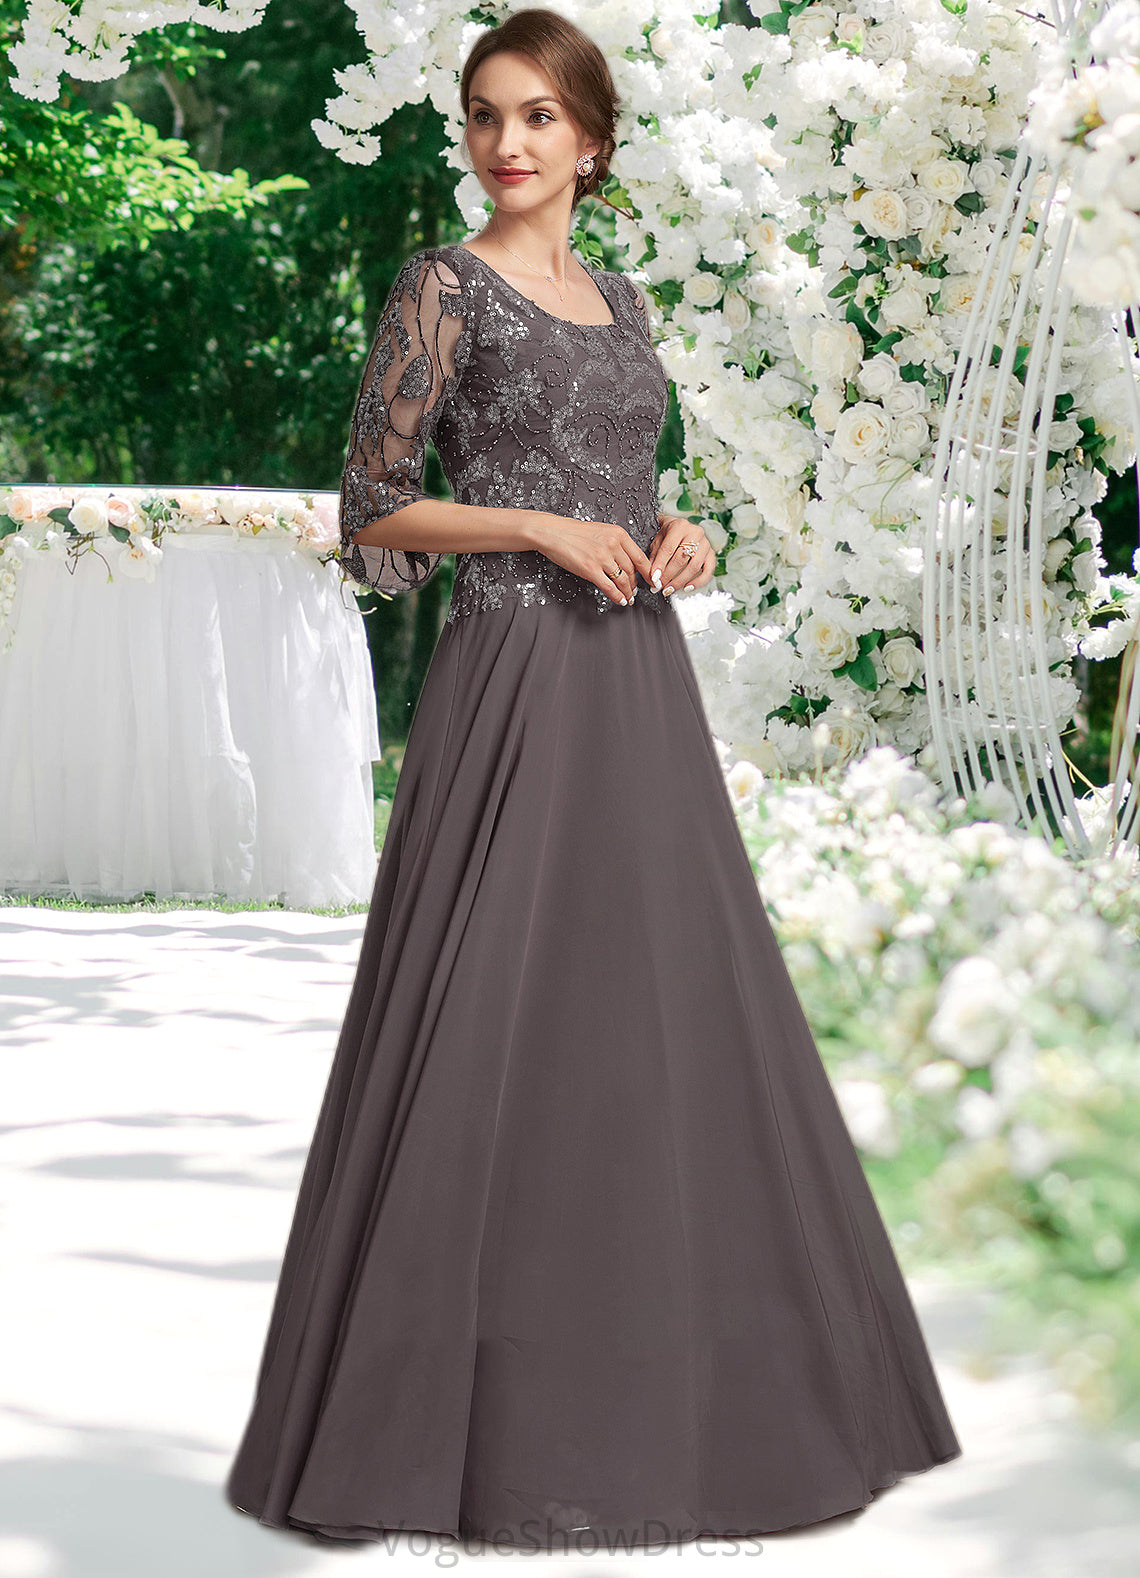 Giuliana A-Line Scoop Neck Floor-Length Chiffon Lace Mother of the Bride Dress With Beading Sequins DL126P0015036